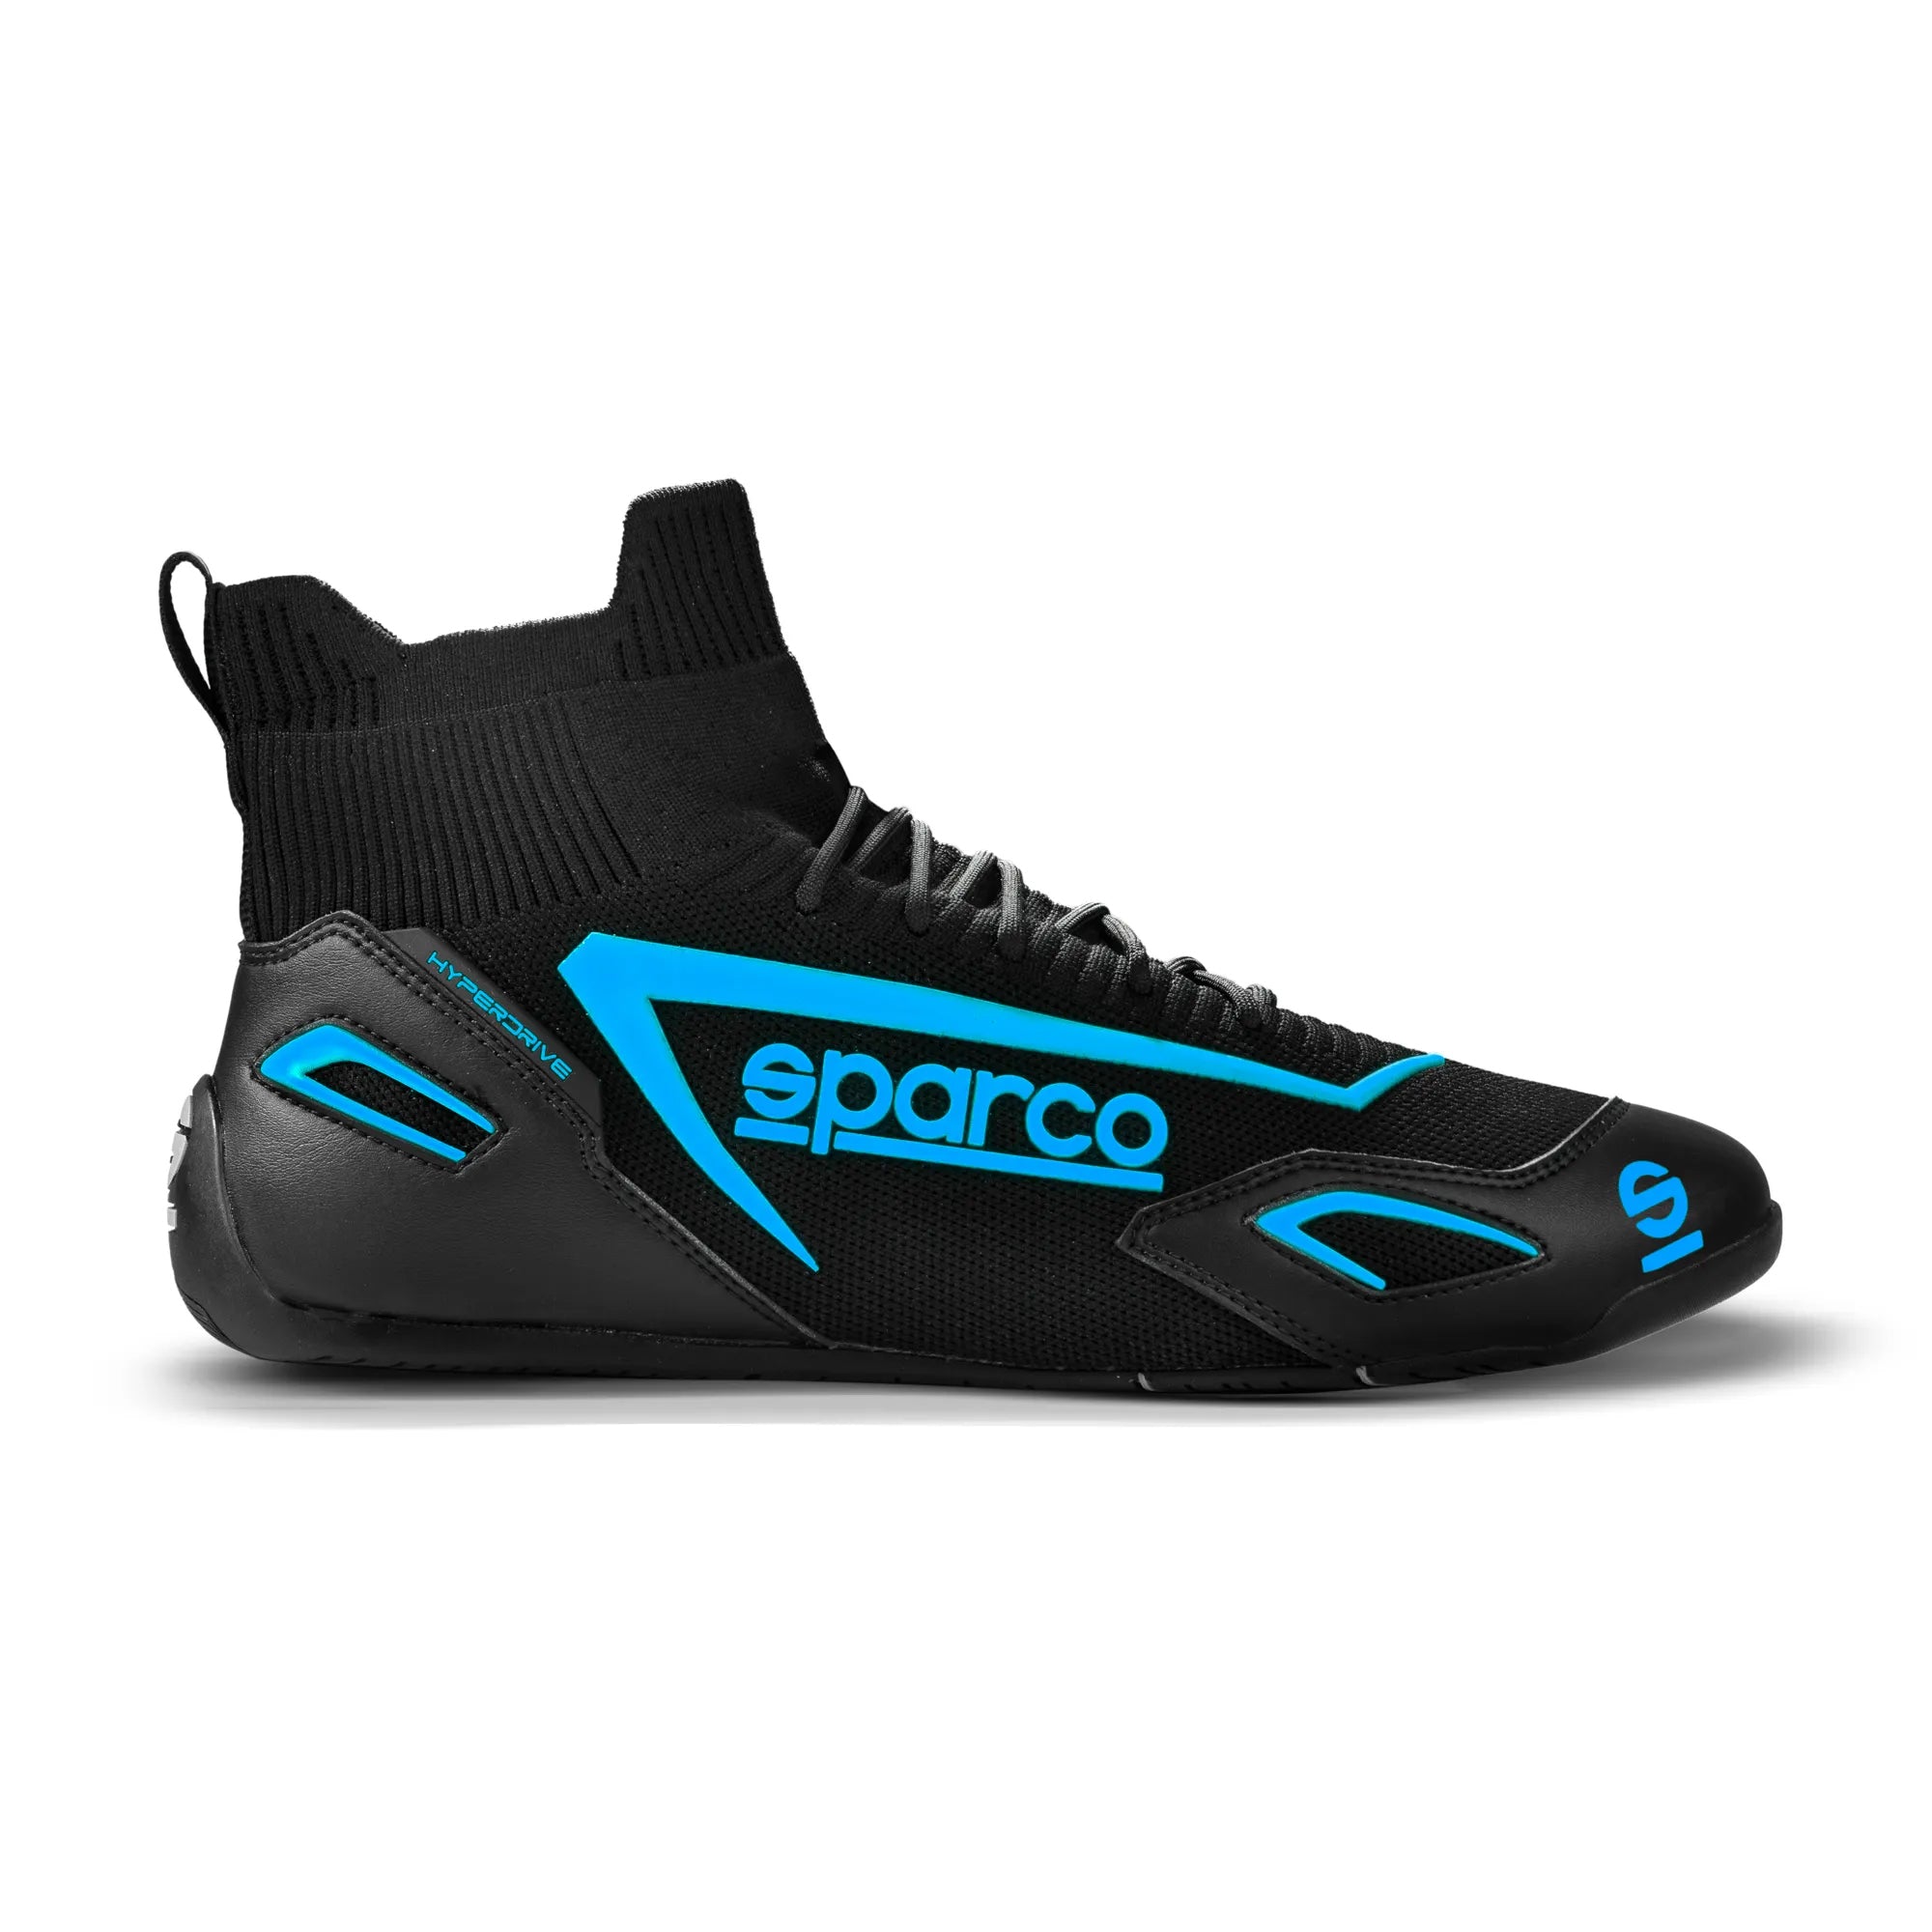 SPARCO 00129346NRAZ Gaming sim racing shoes HYPERDRIVE, black/blue, size 46 Photo-0 